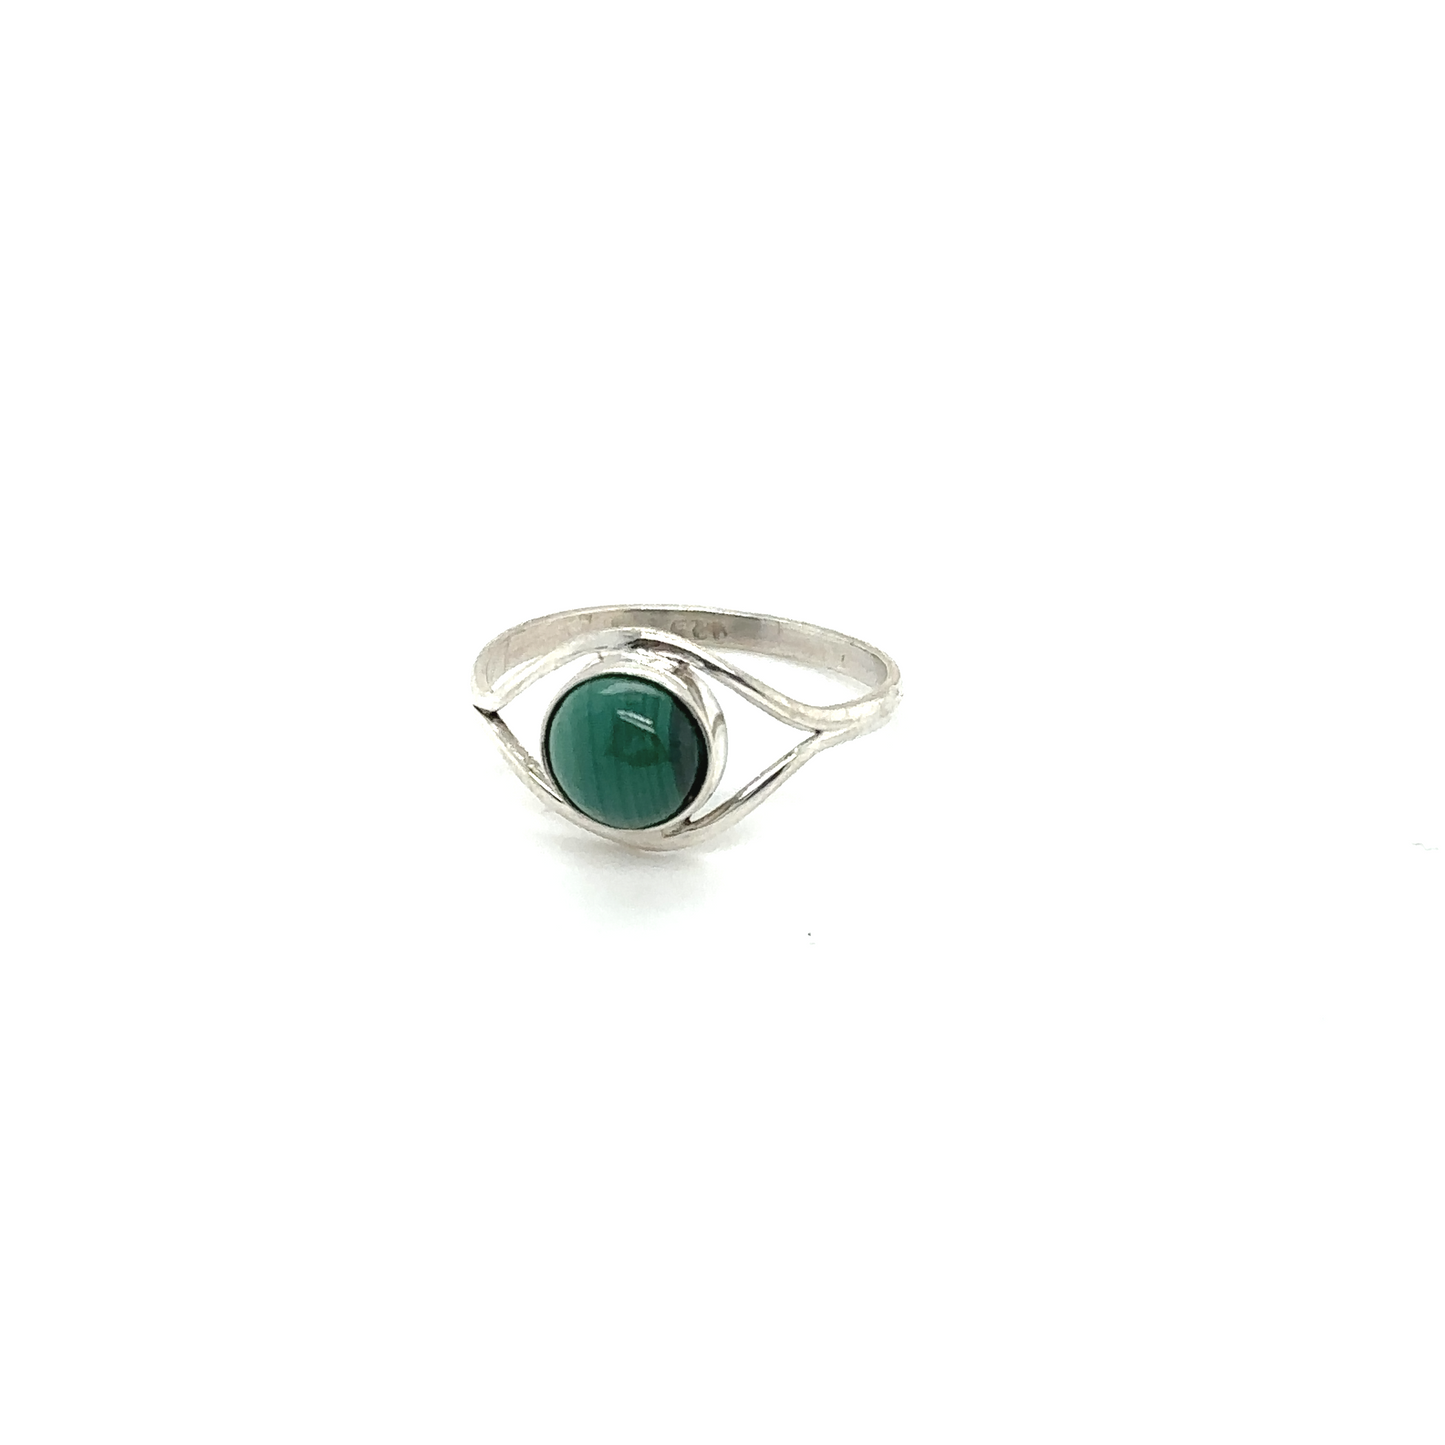 A contemporary silver ring with Abstract Stone Eye Rings.